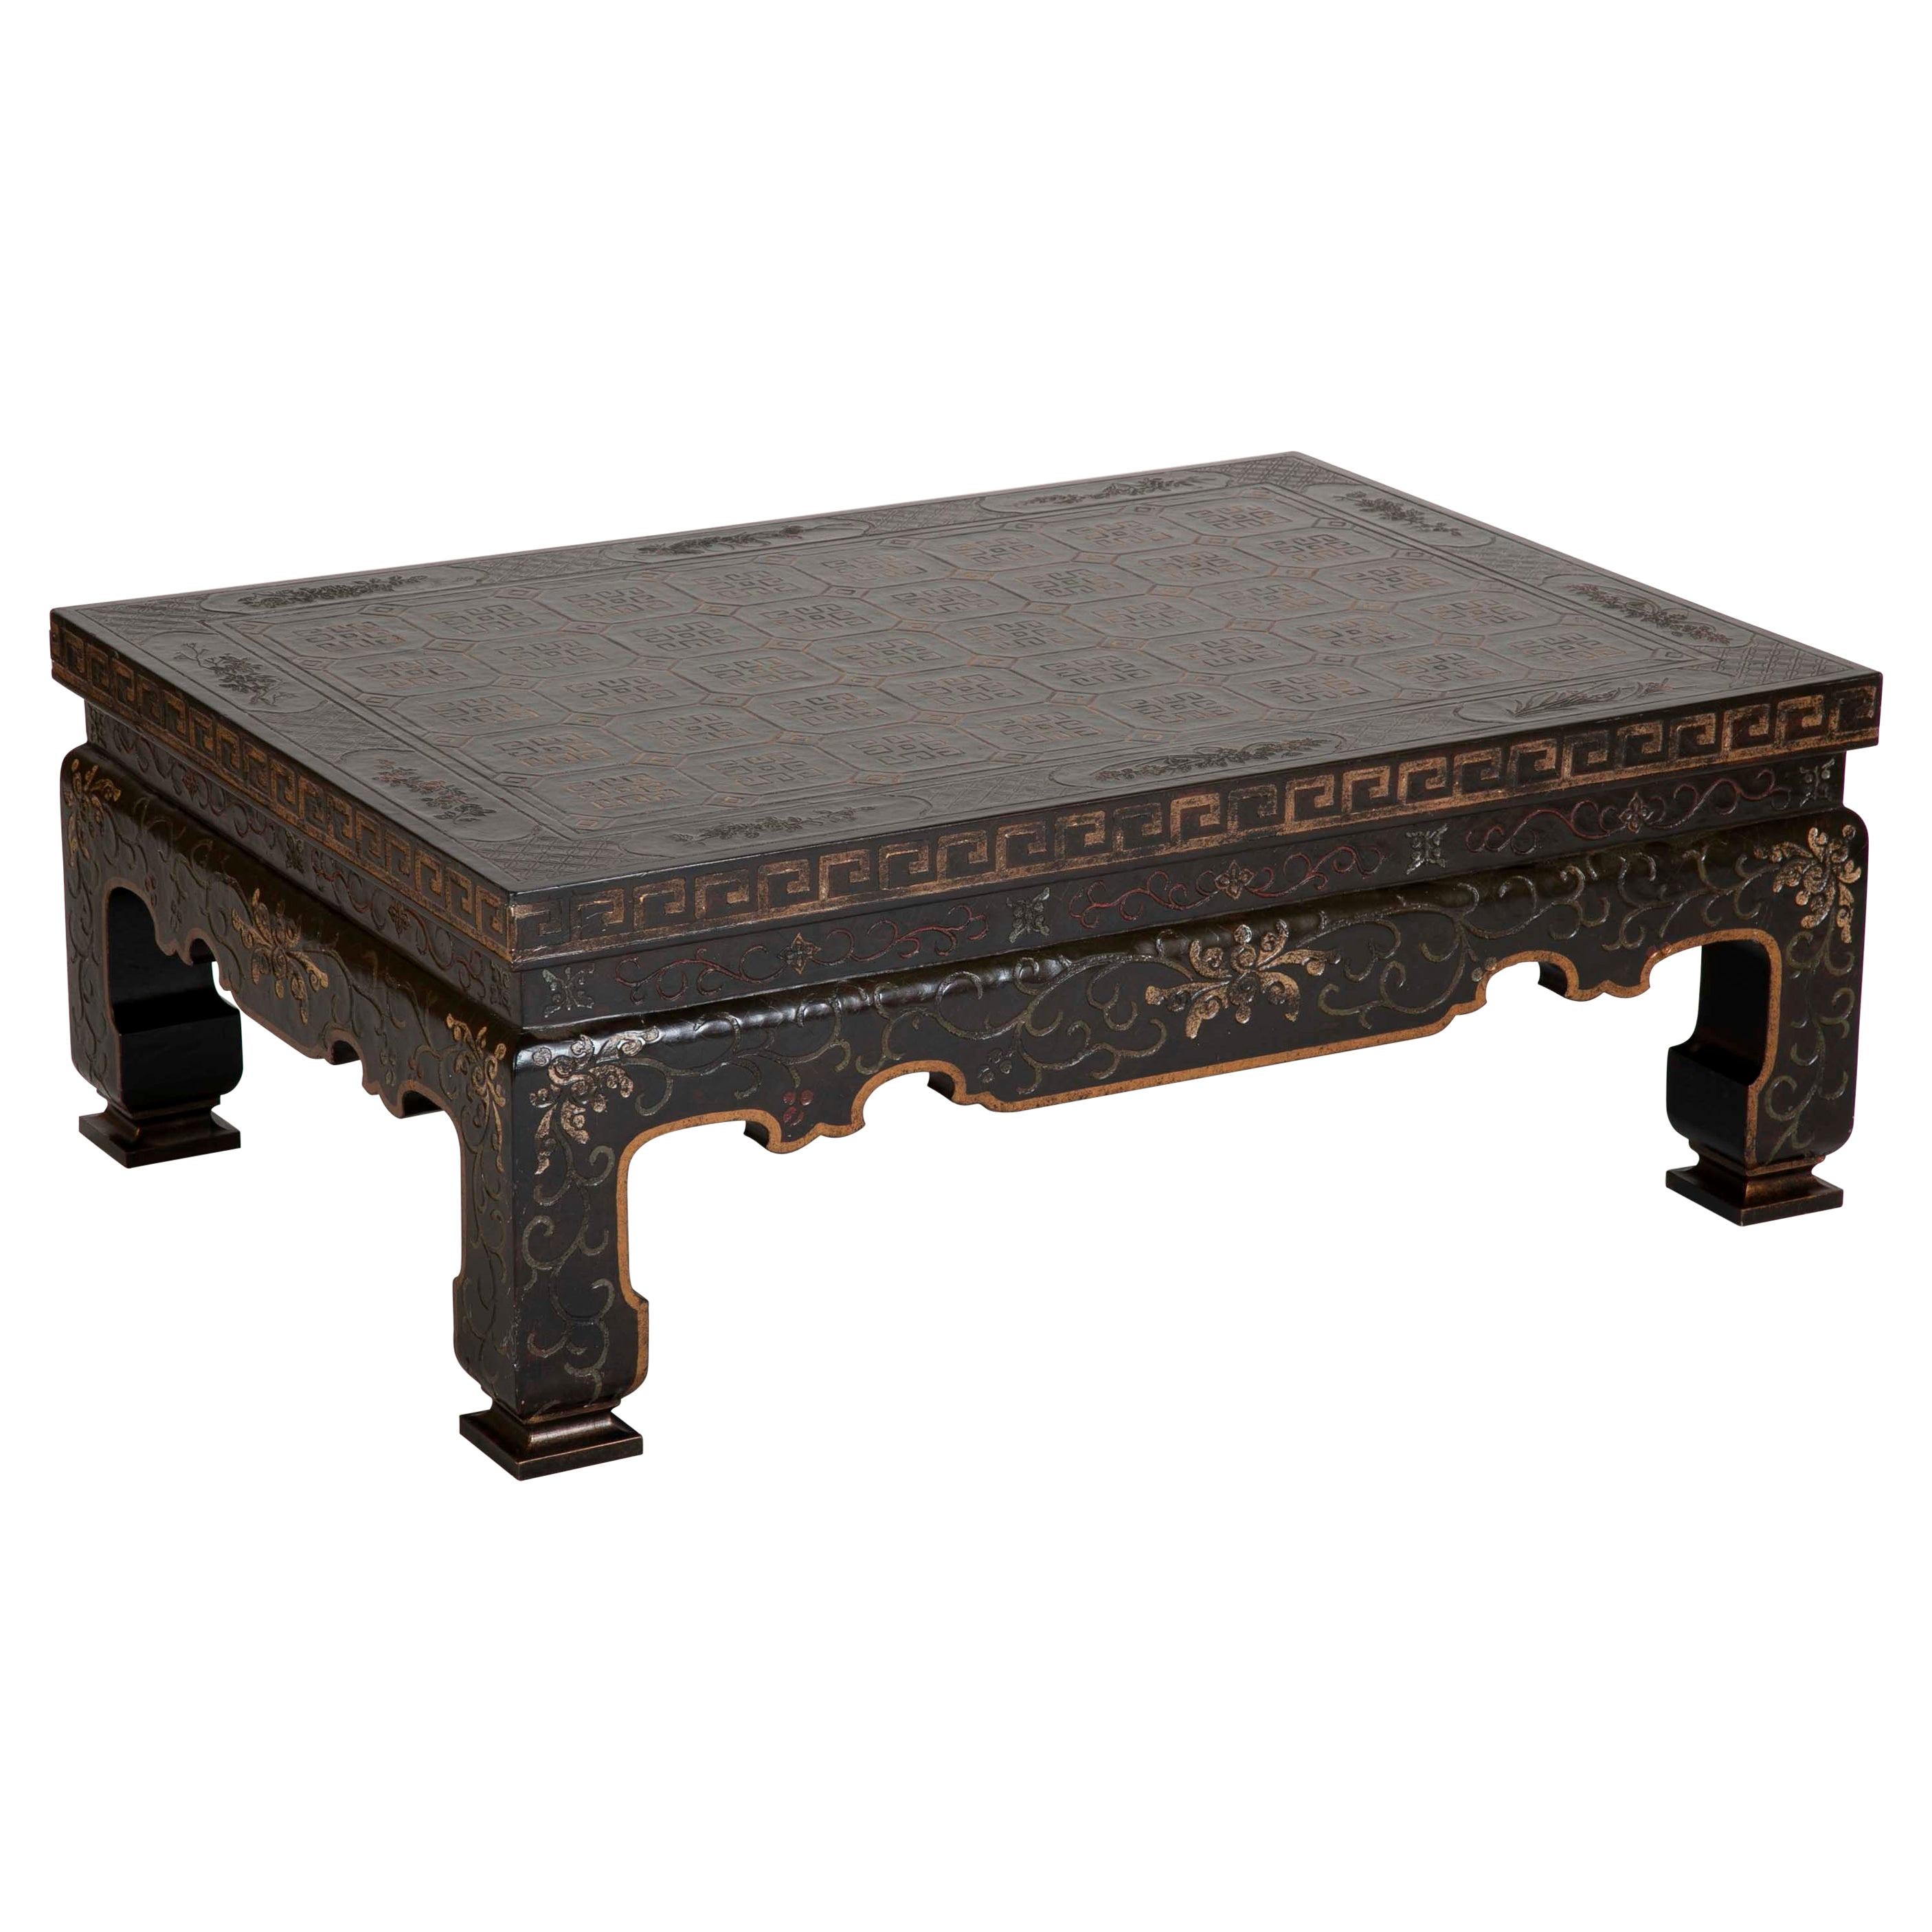 Midcentury Black Lacquer and Gilt Coffee Table with Chinoiserie Decoration